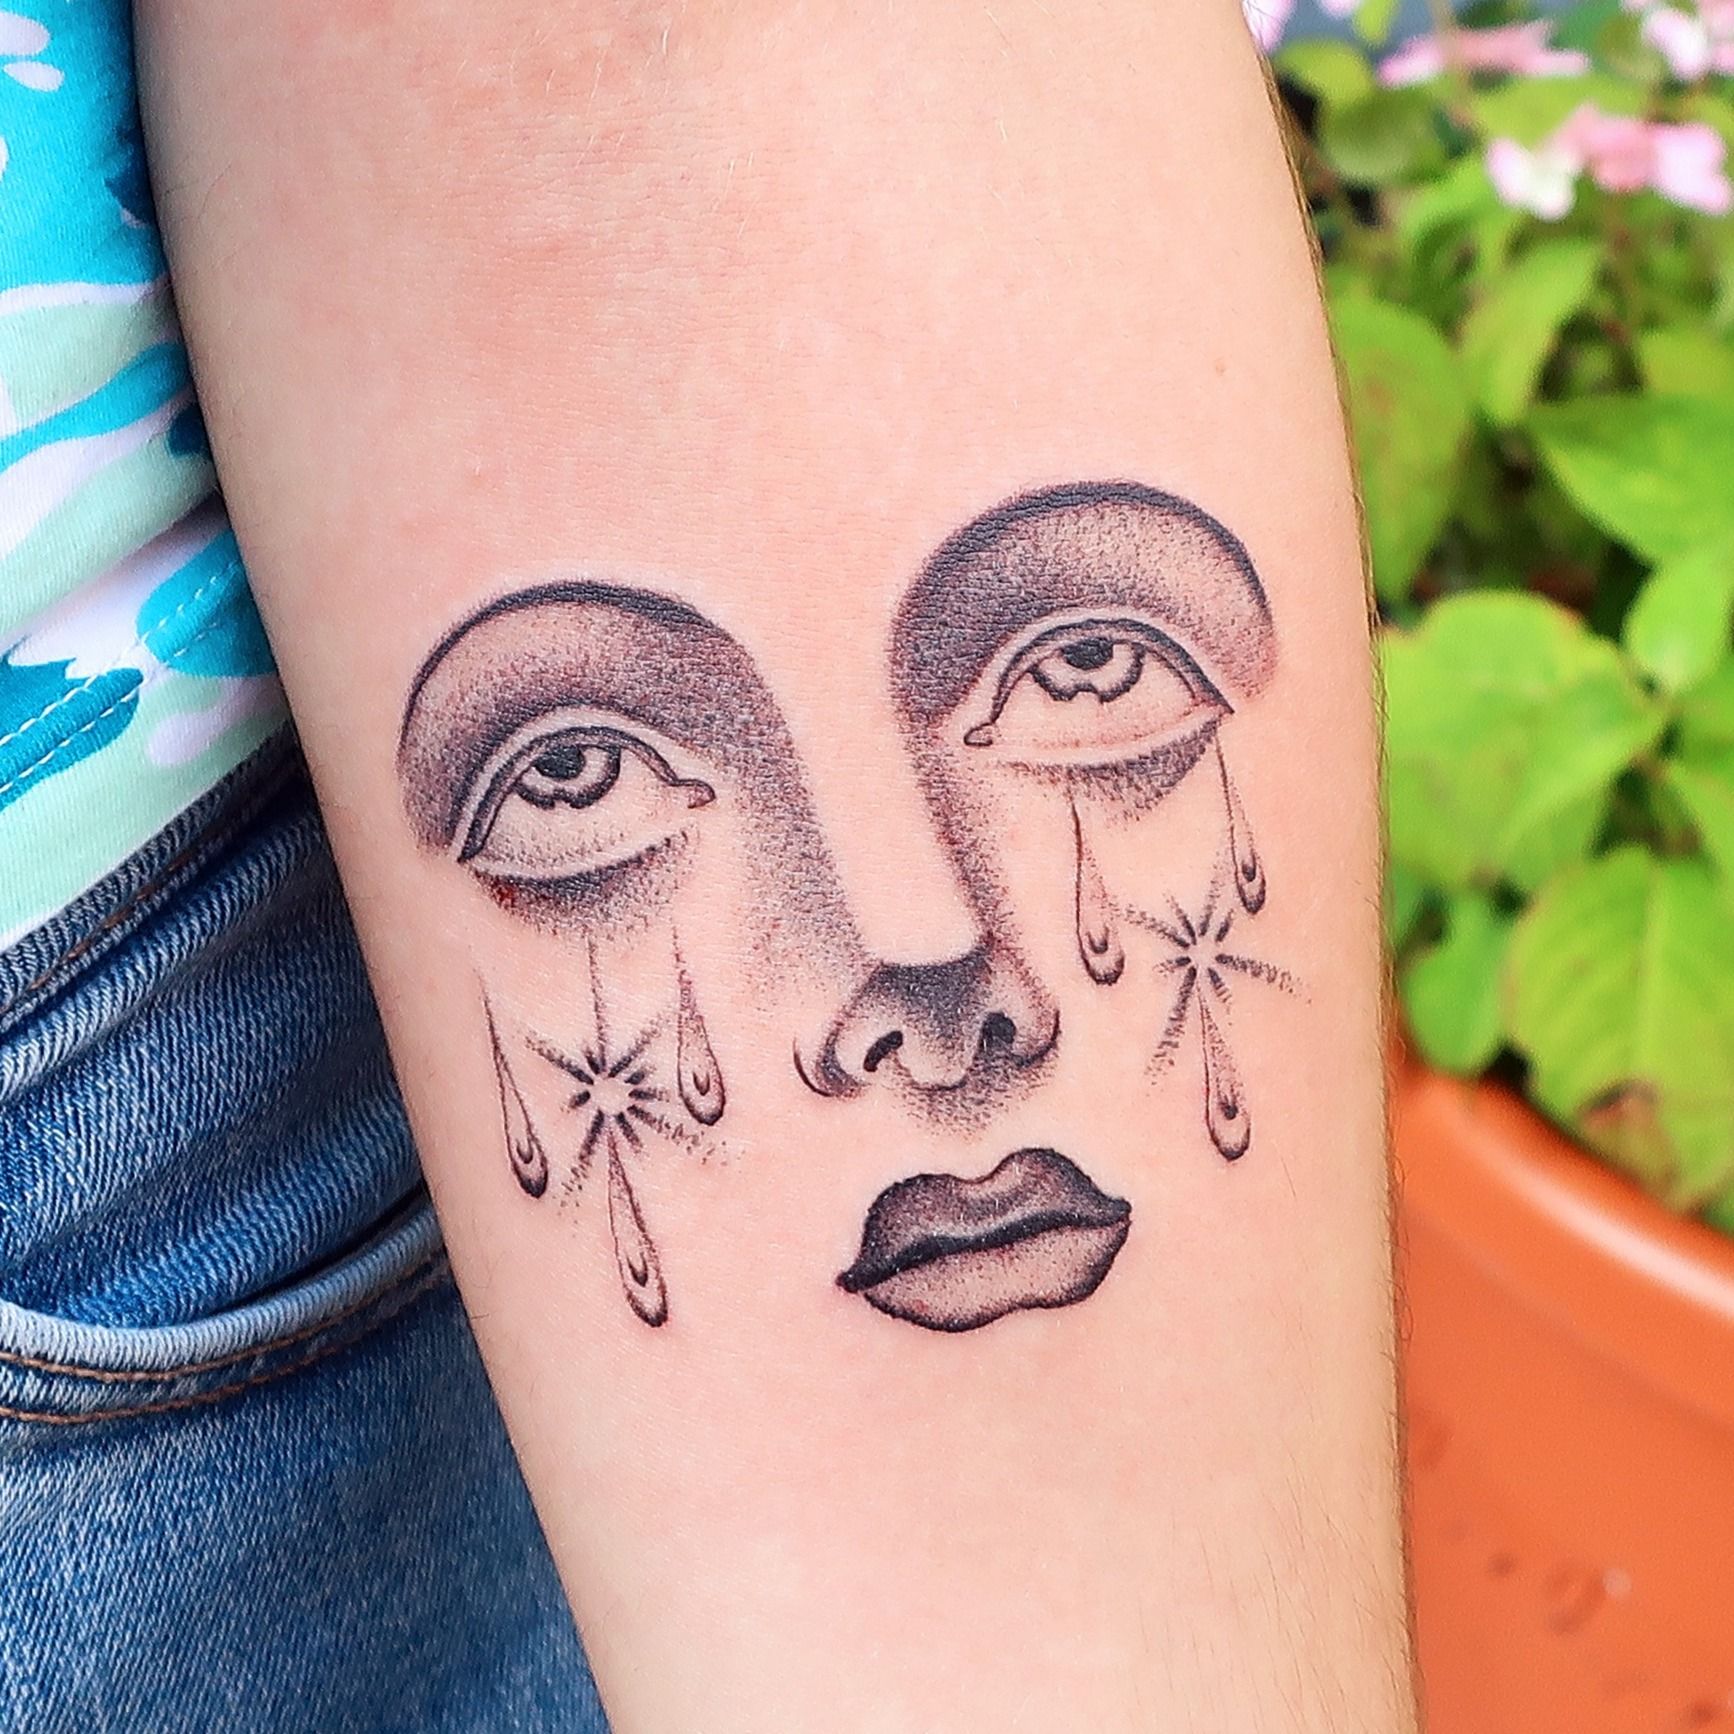 30 Ideas for a Broken Heart Tattoo to Mend Your Soul